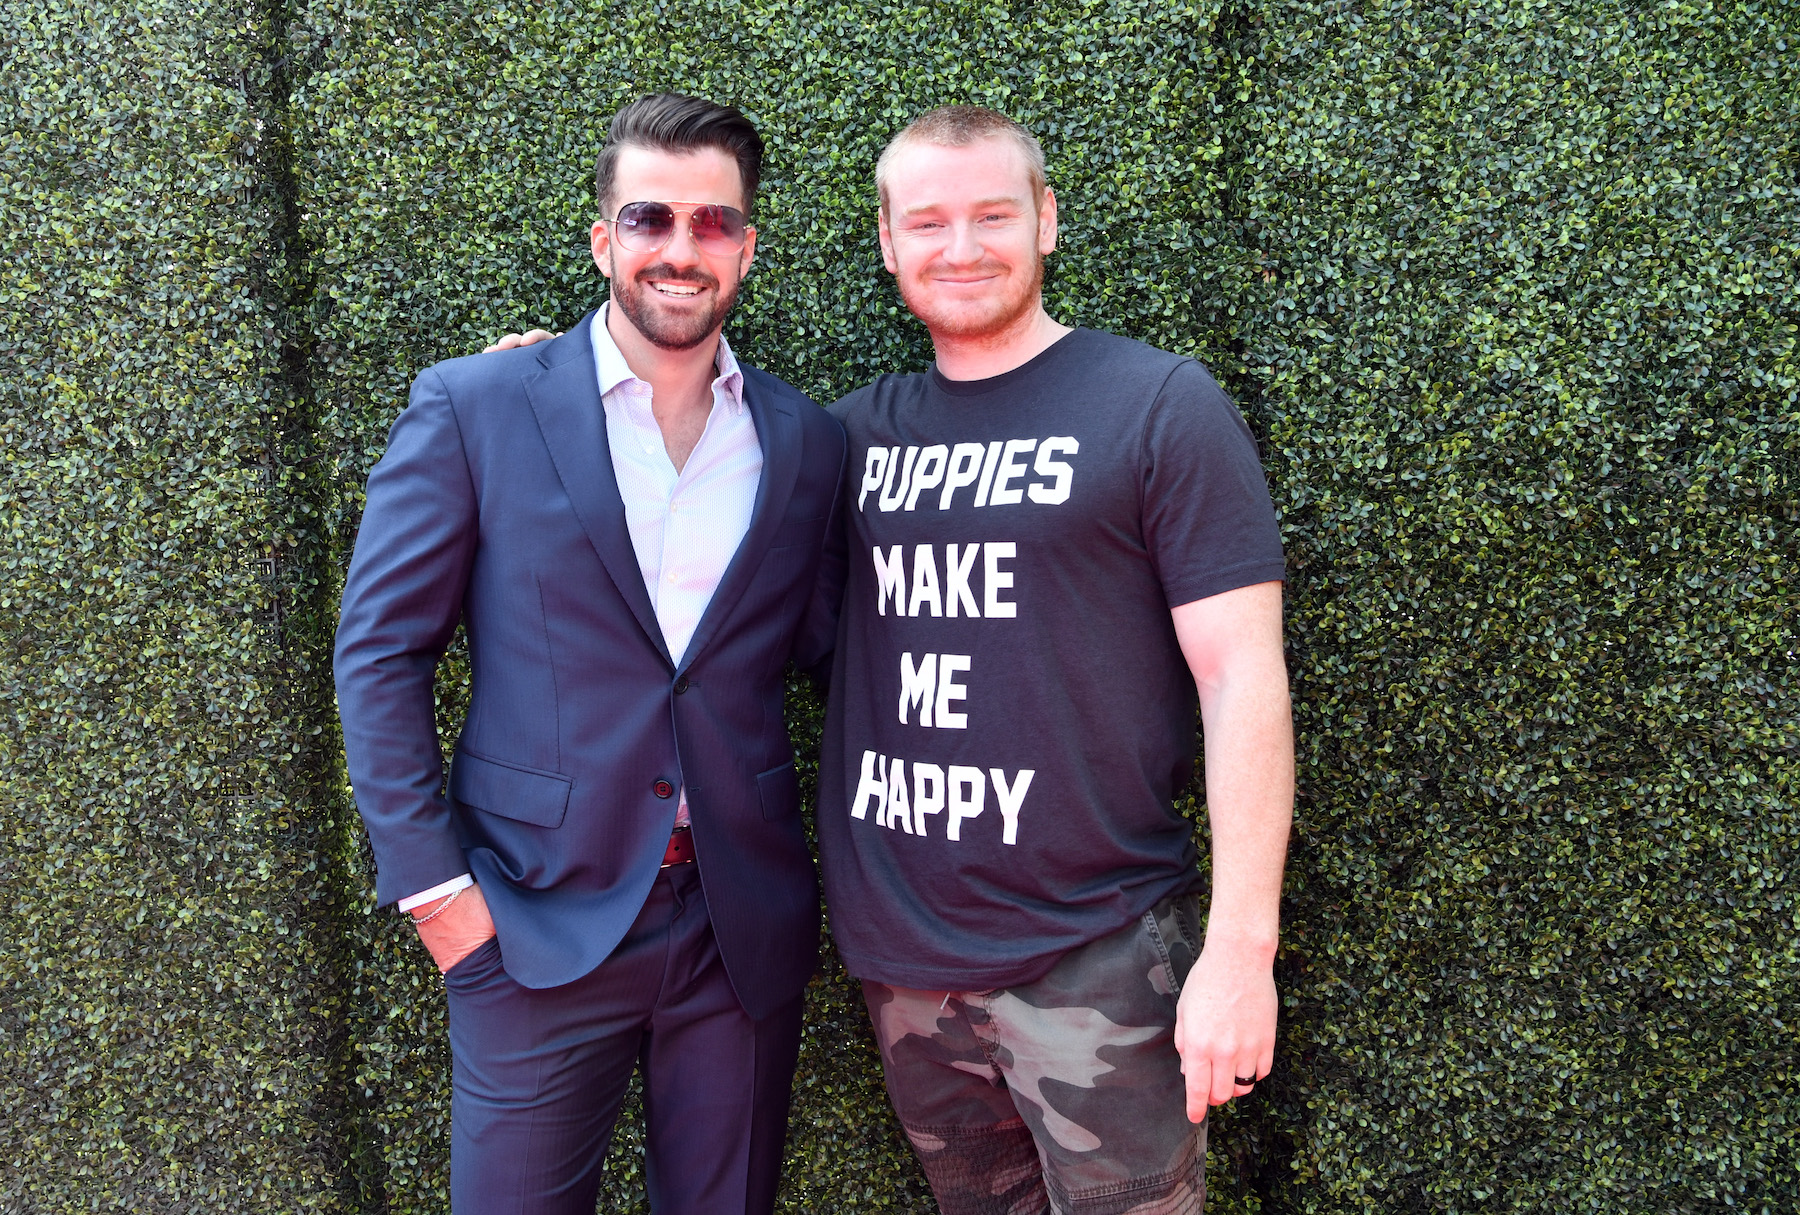 Johnny 'Bananas' Devenanzio and Wes Bergmann from MTV's 'The Challenge' standing together and smiling at an event